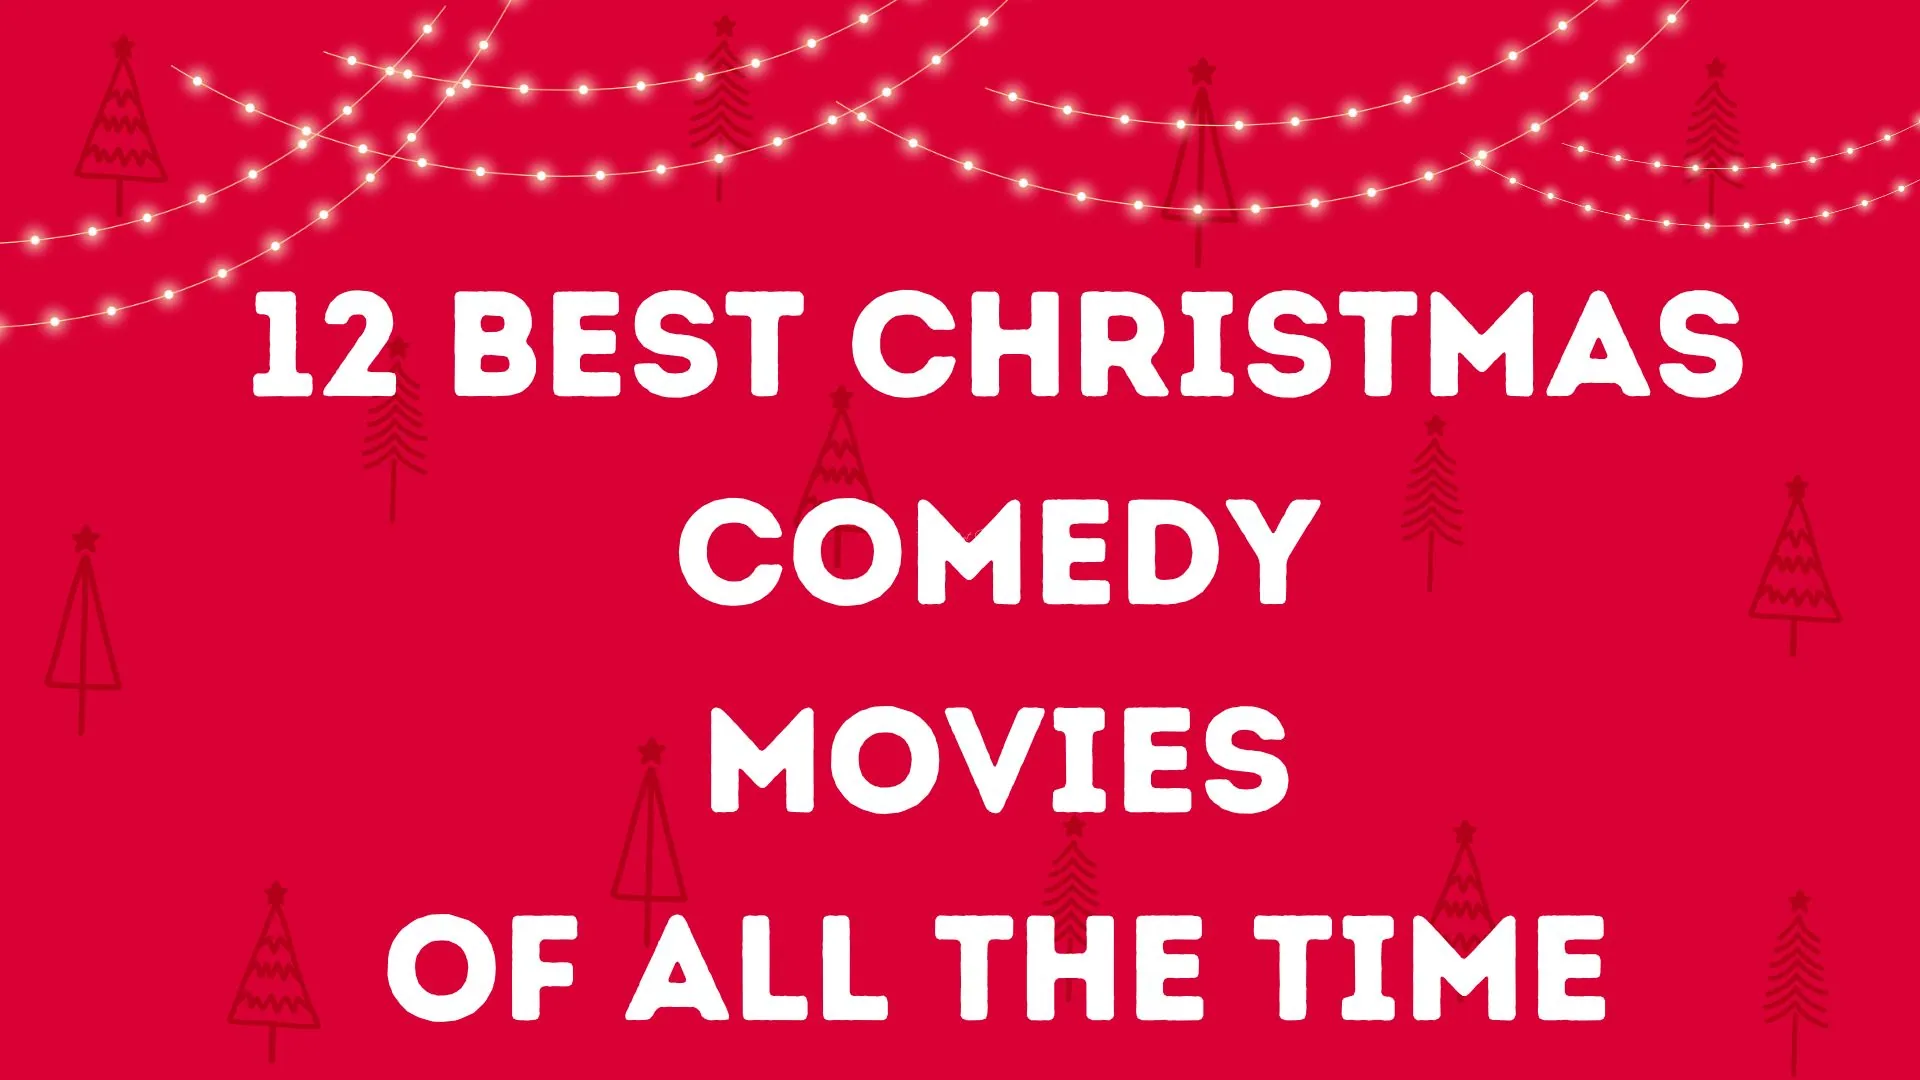 12 Best Christmas Comedy Movies Of All Time